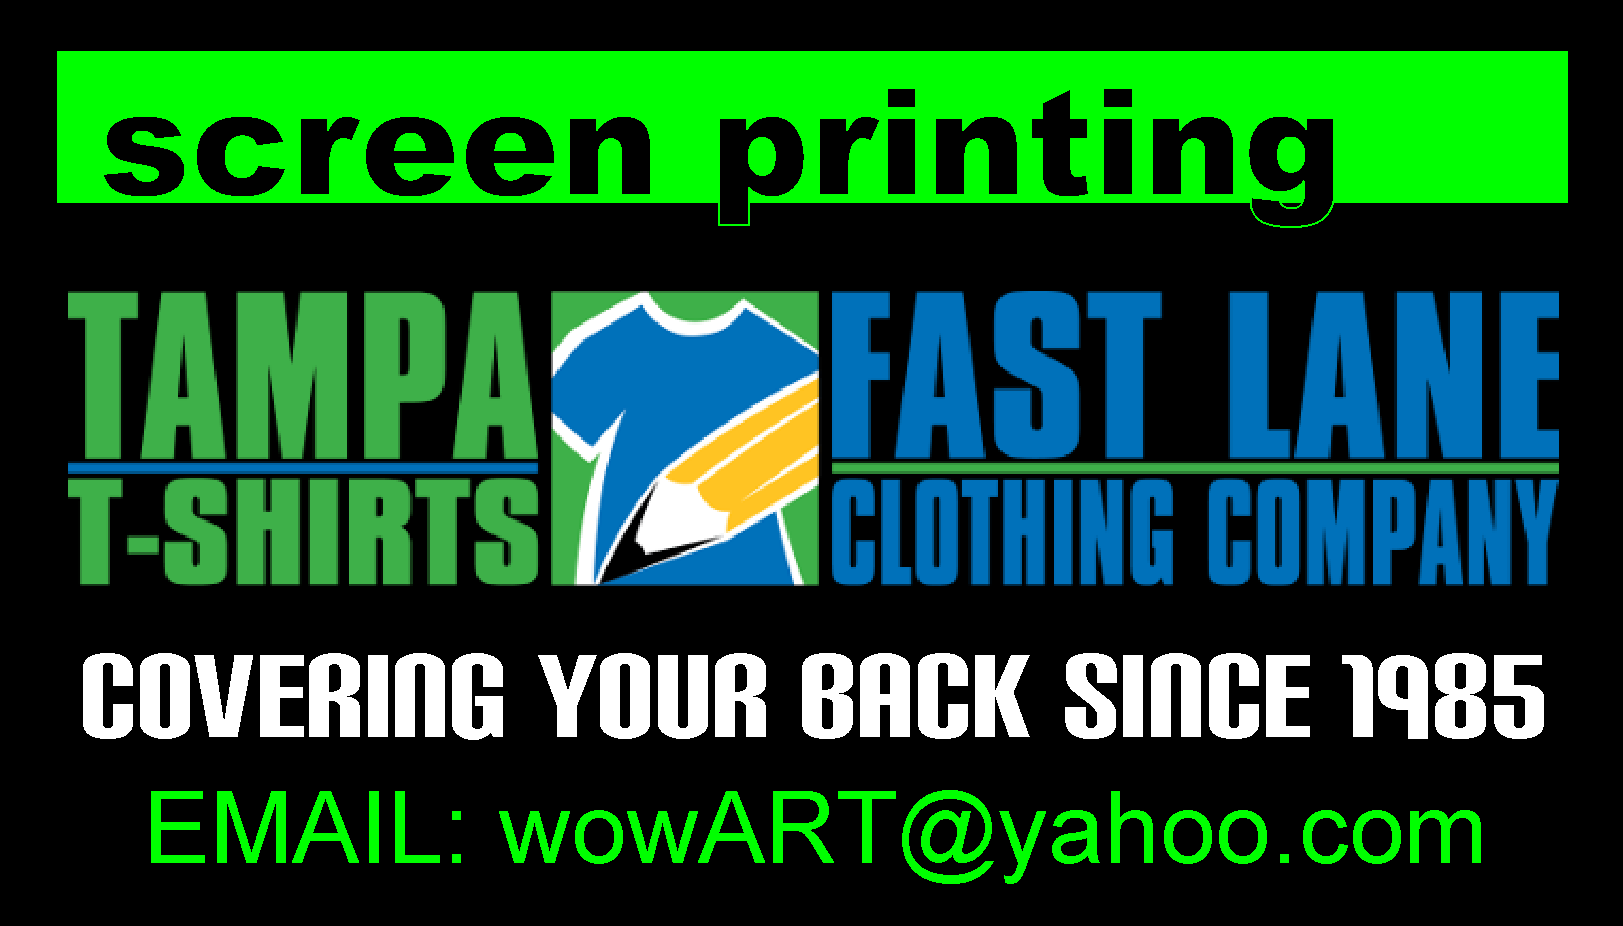 screen printing, embroidery, promotional products, marketing, trade show